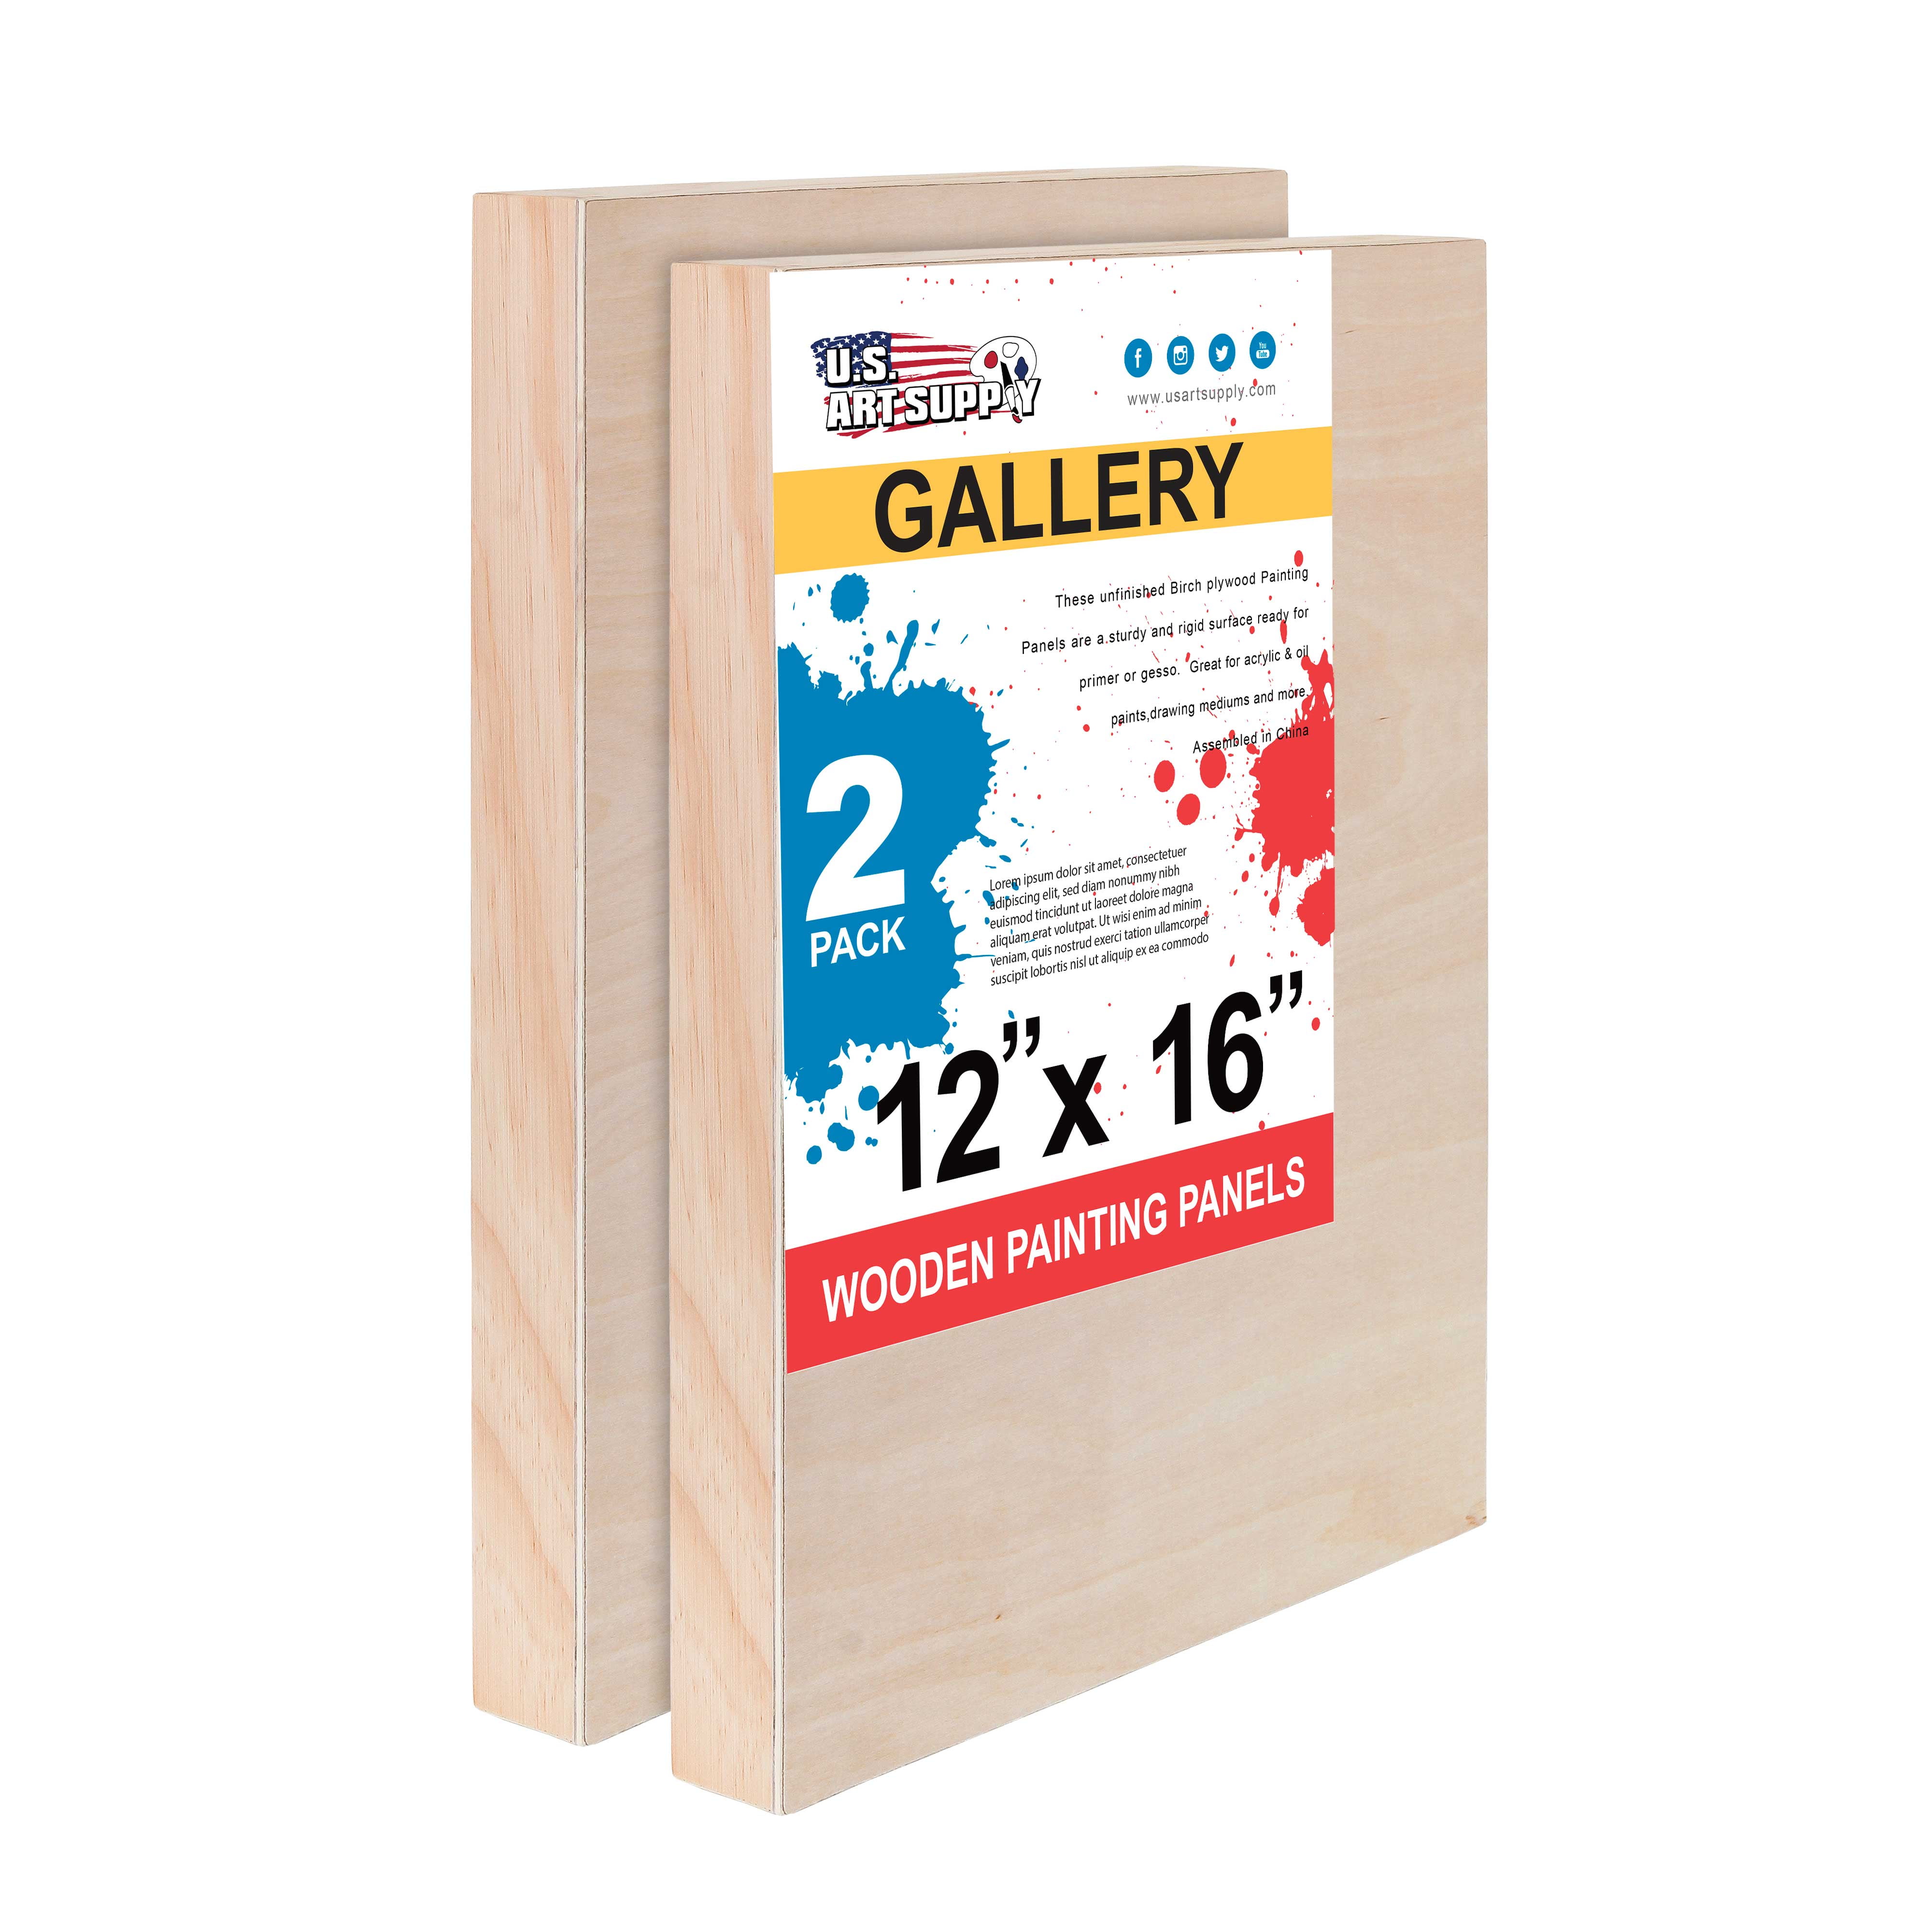 U.S Oil Painting Mixed-Media Craft Encaustic Acrylic Pack of 2 Gallery 1-1/2 Deep Cradle - Artist Depth Wooden Wall Canvases Art Supply 24 x 36 Birch Wood Paint Pouring Panel Boards 